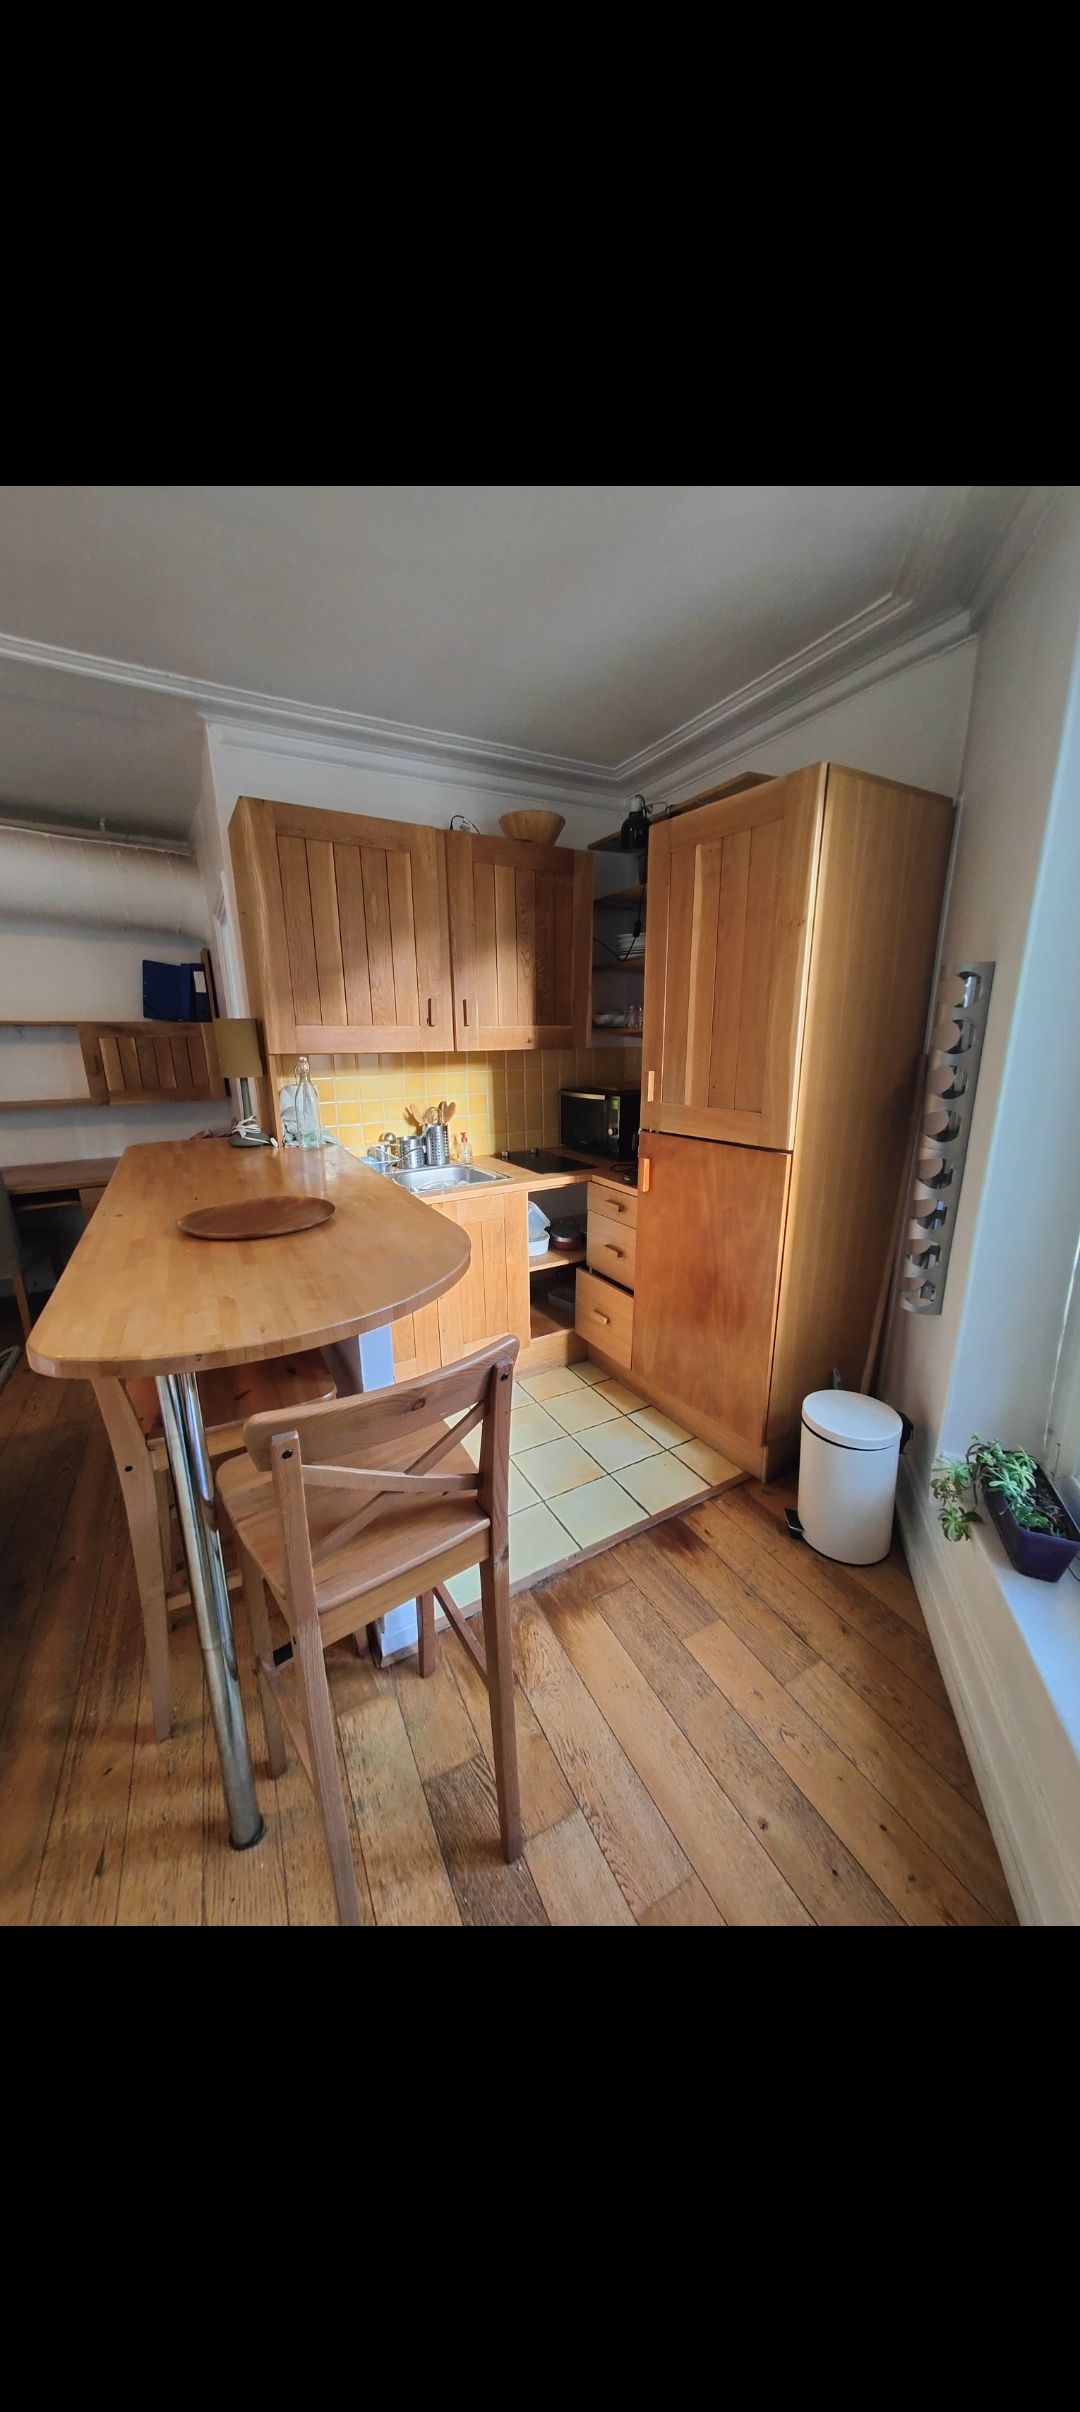 Great flat in excellent location